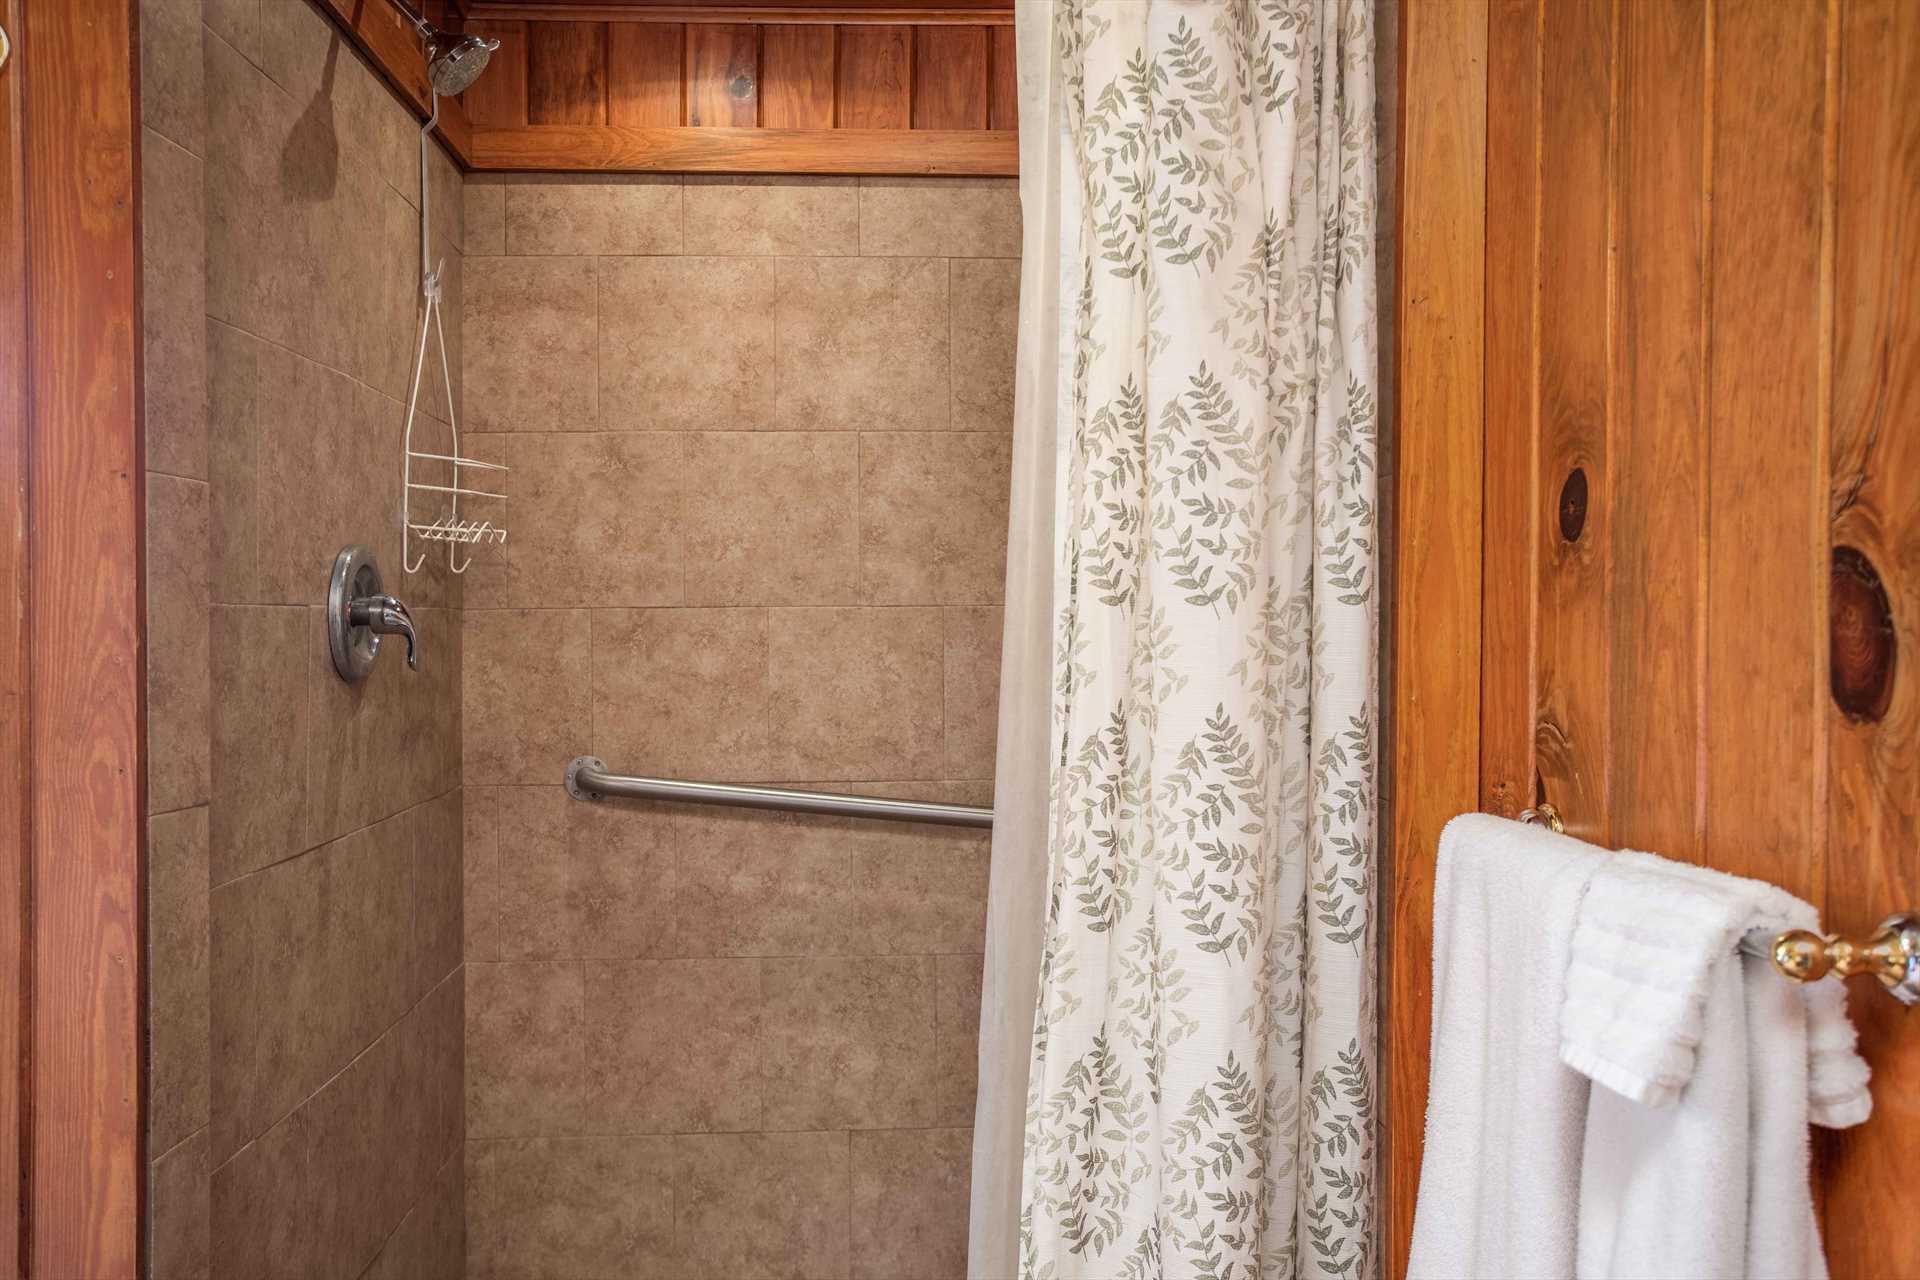                                                 A spacious tiled shower provides a perfect cleanup space in the second full bath.